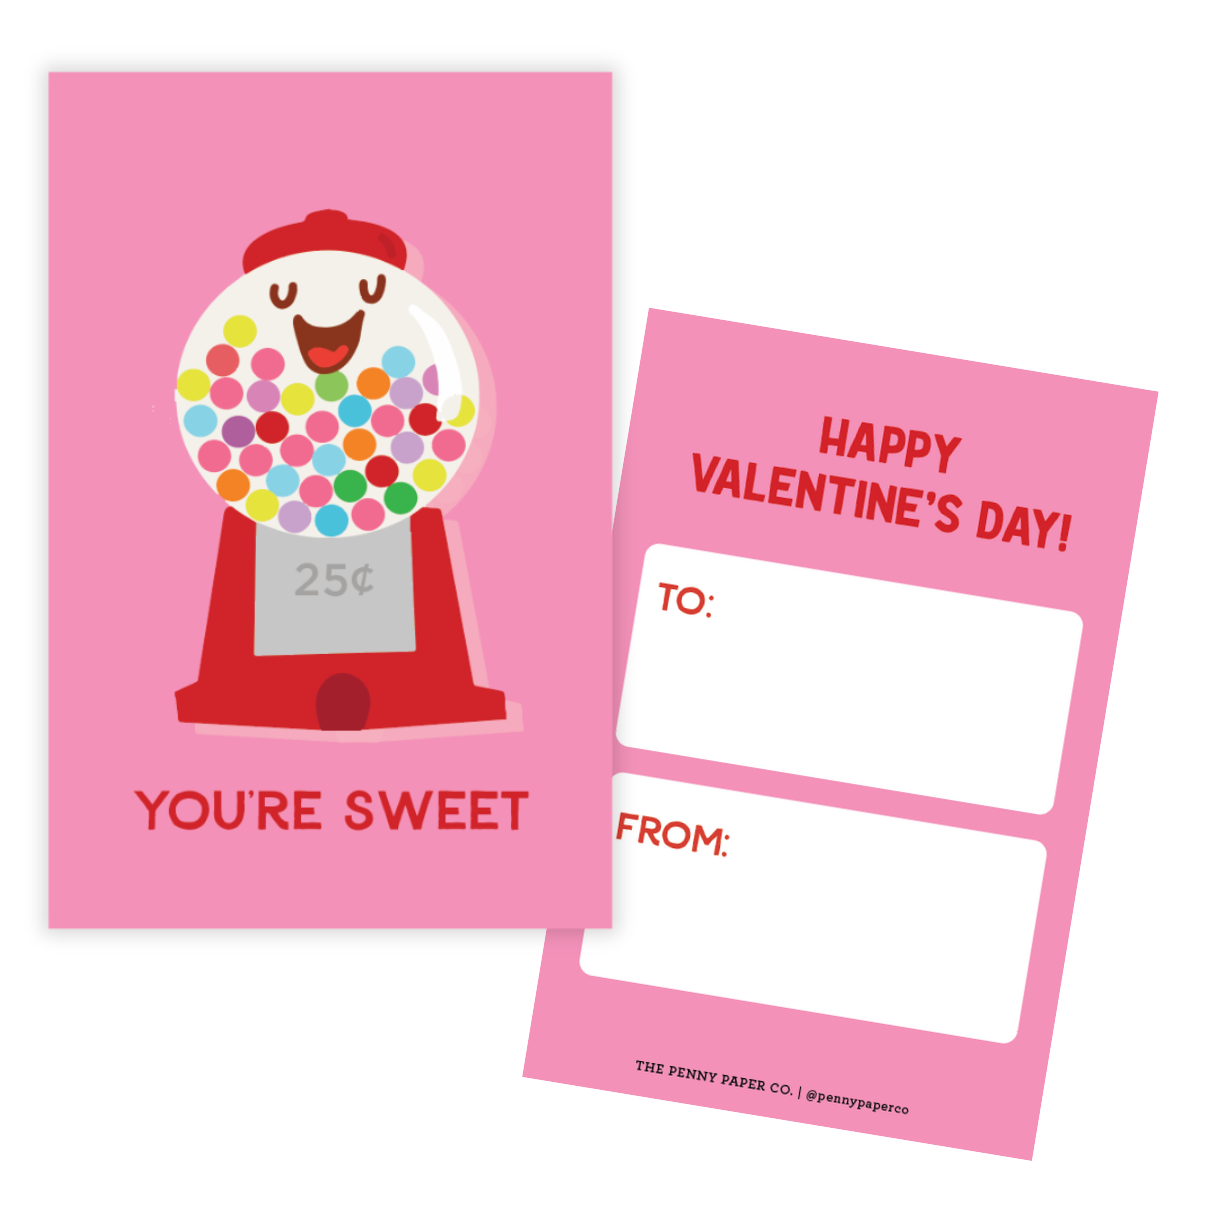 You're Sweet Valentine's Cards